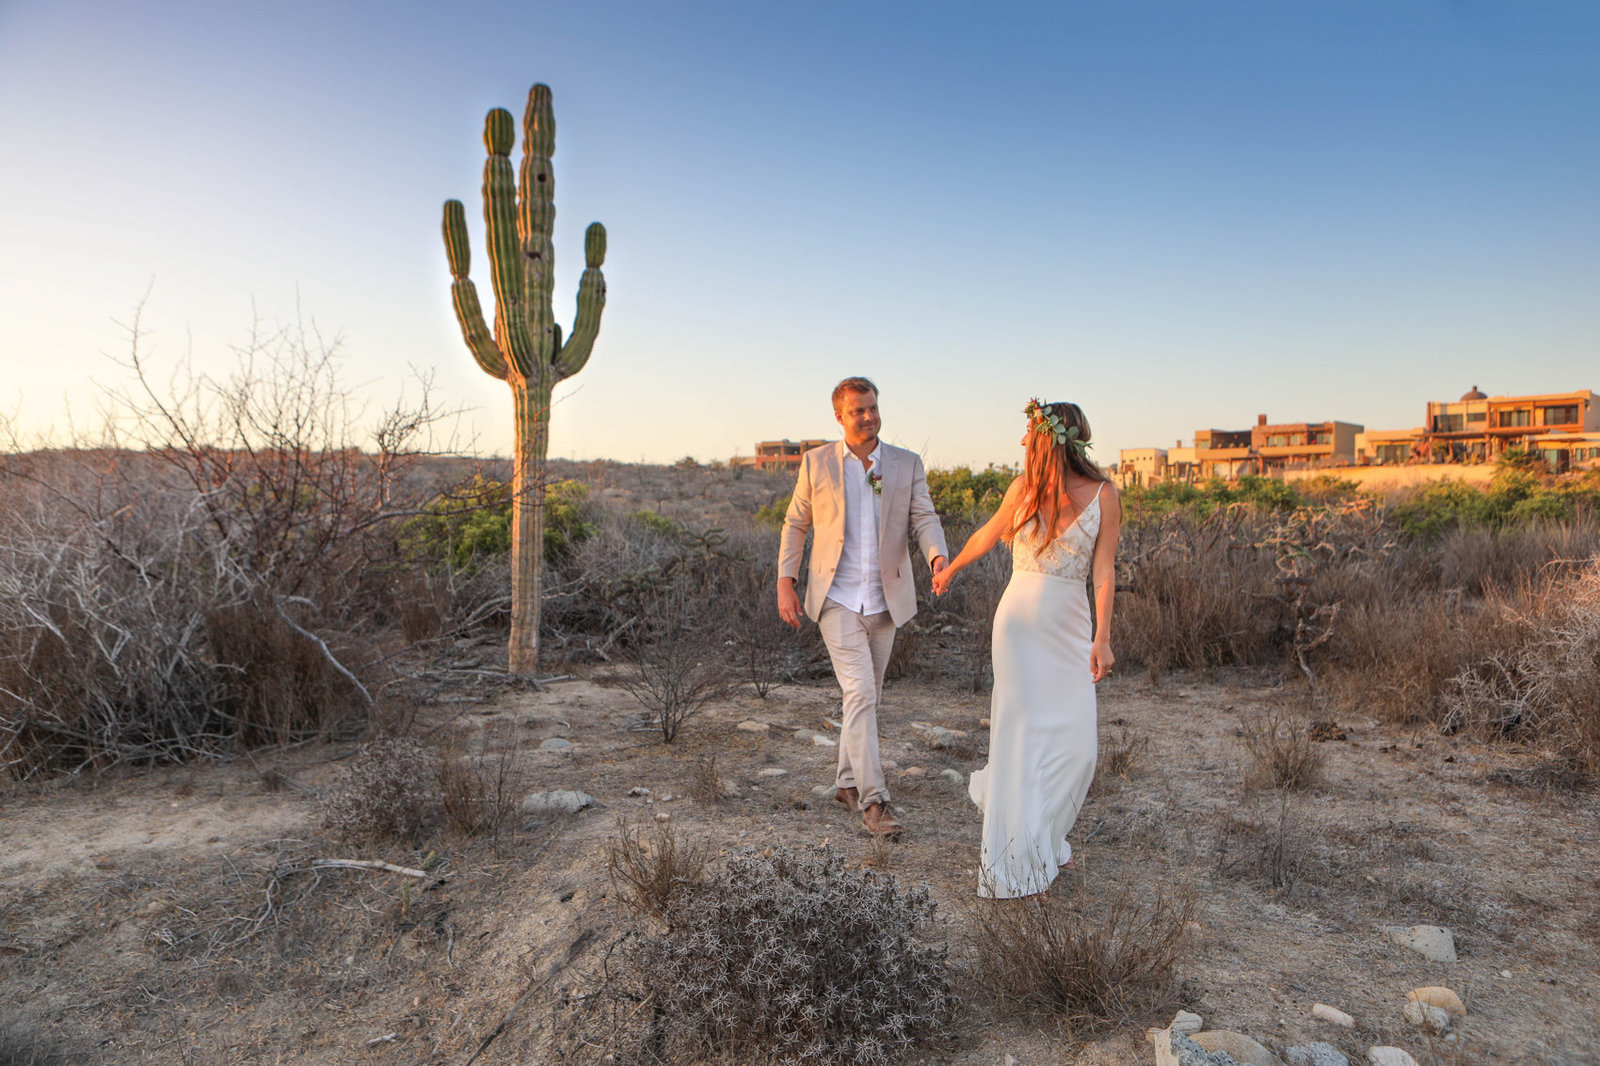 Stunning mexican desert provides beautiful backdrop for golden hour portrait of bride and groom